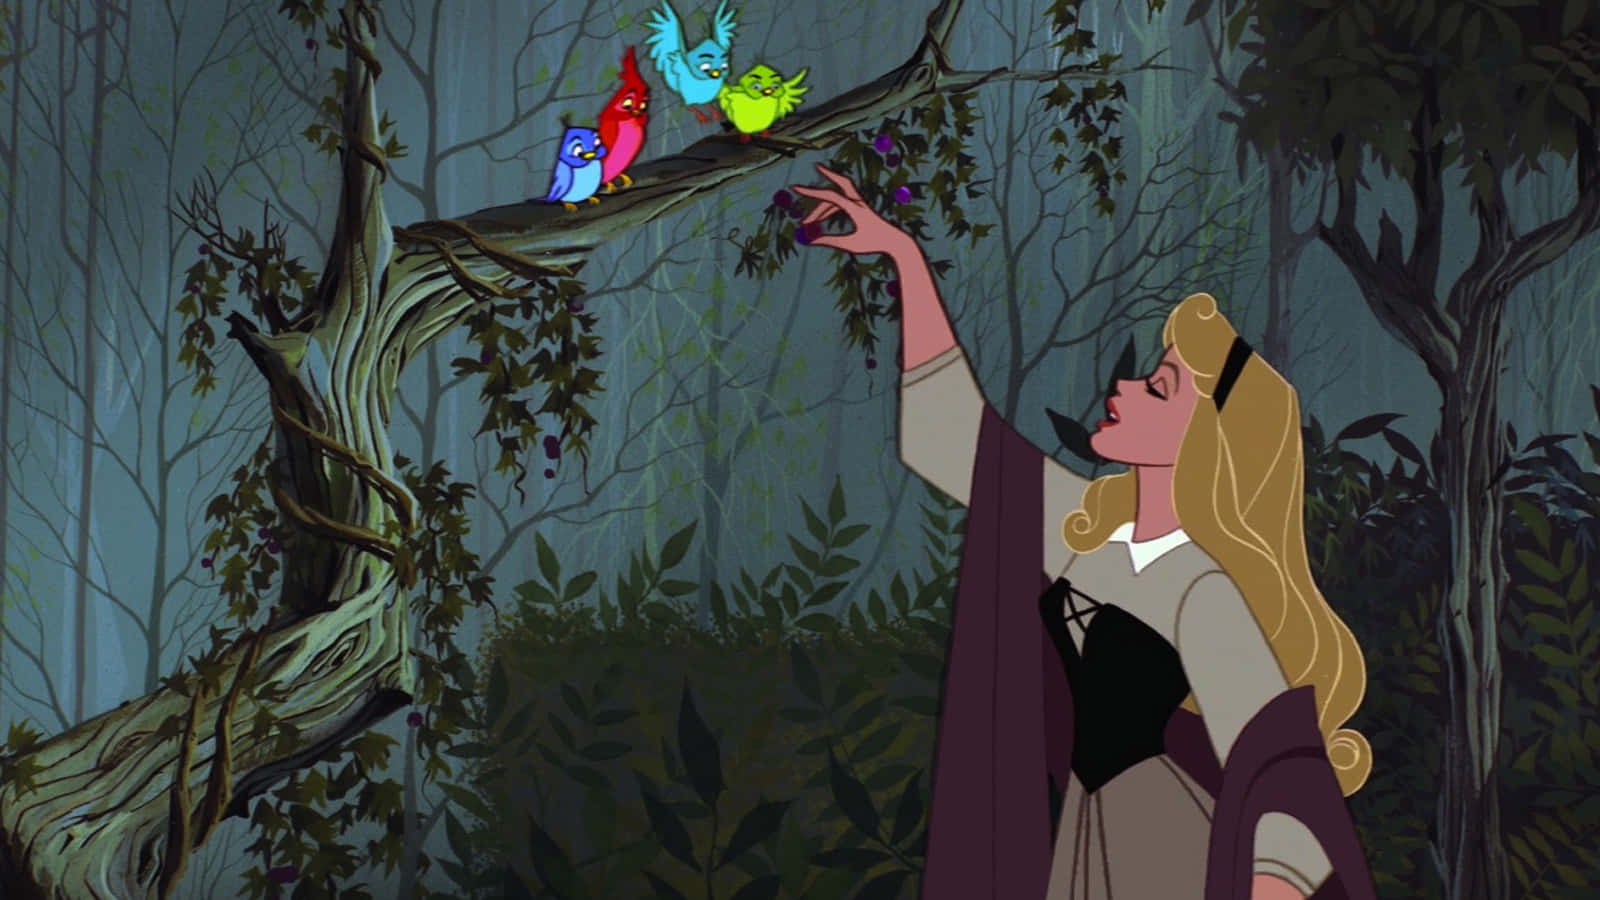 A Princess Is Reaching Out To A Bird